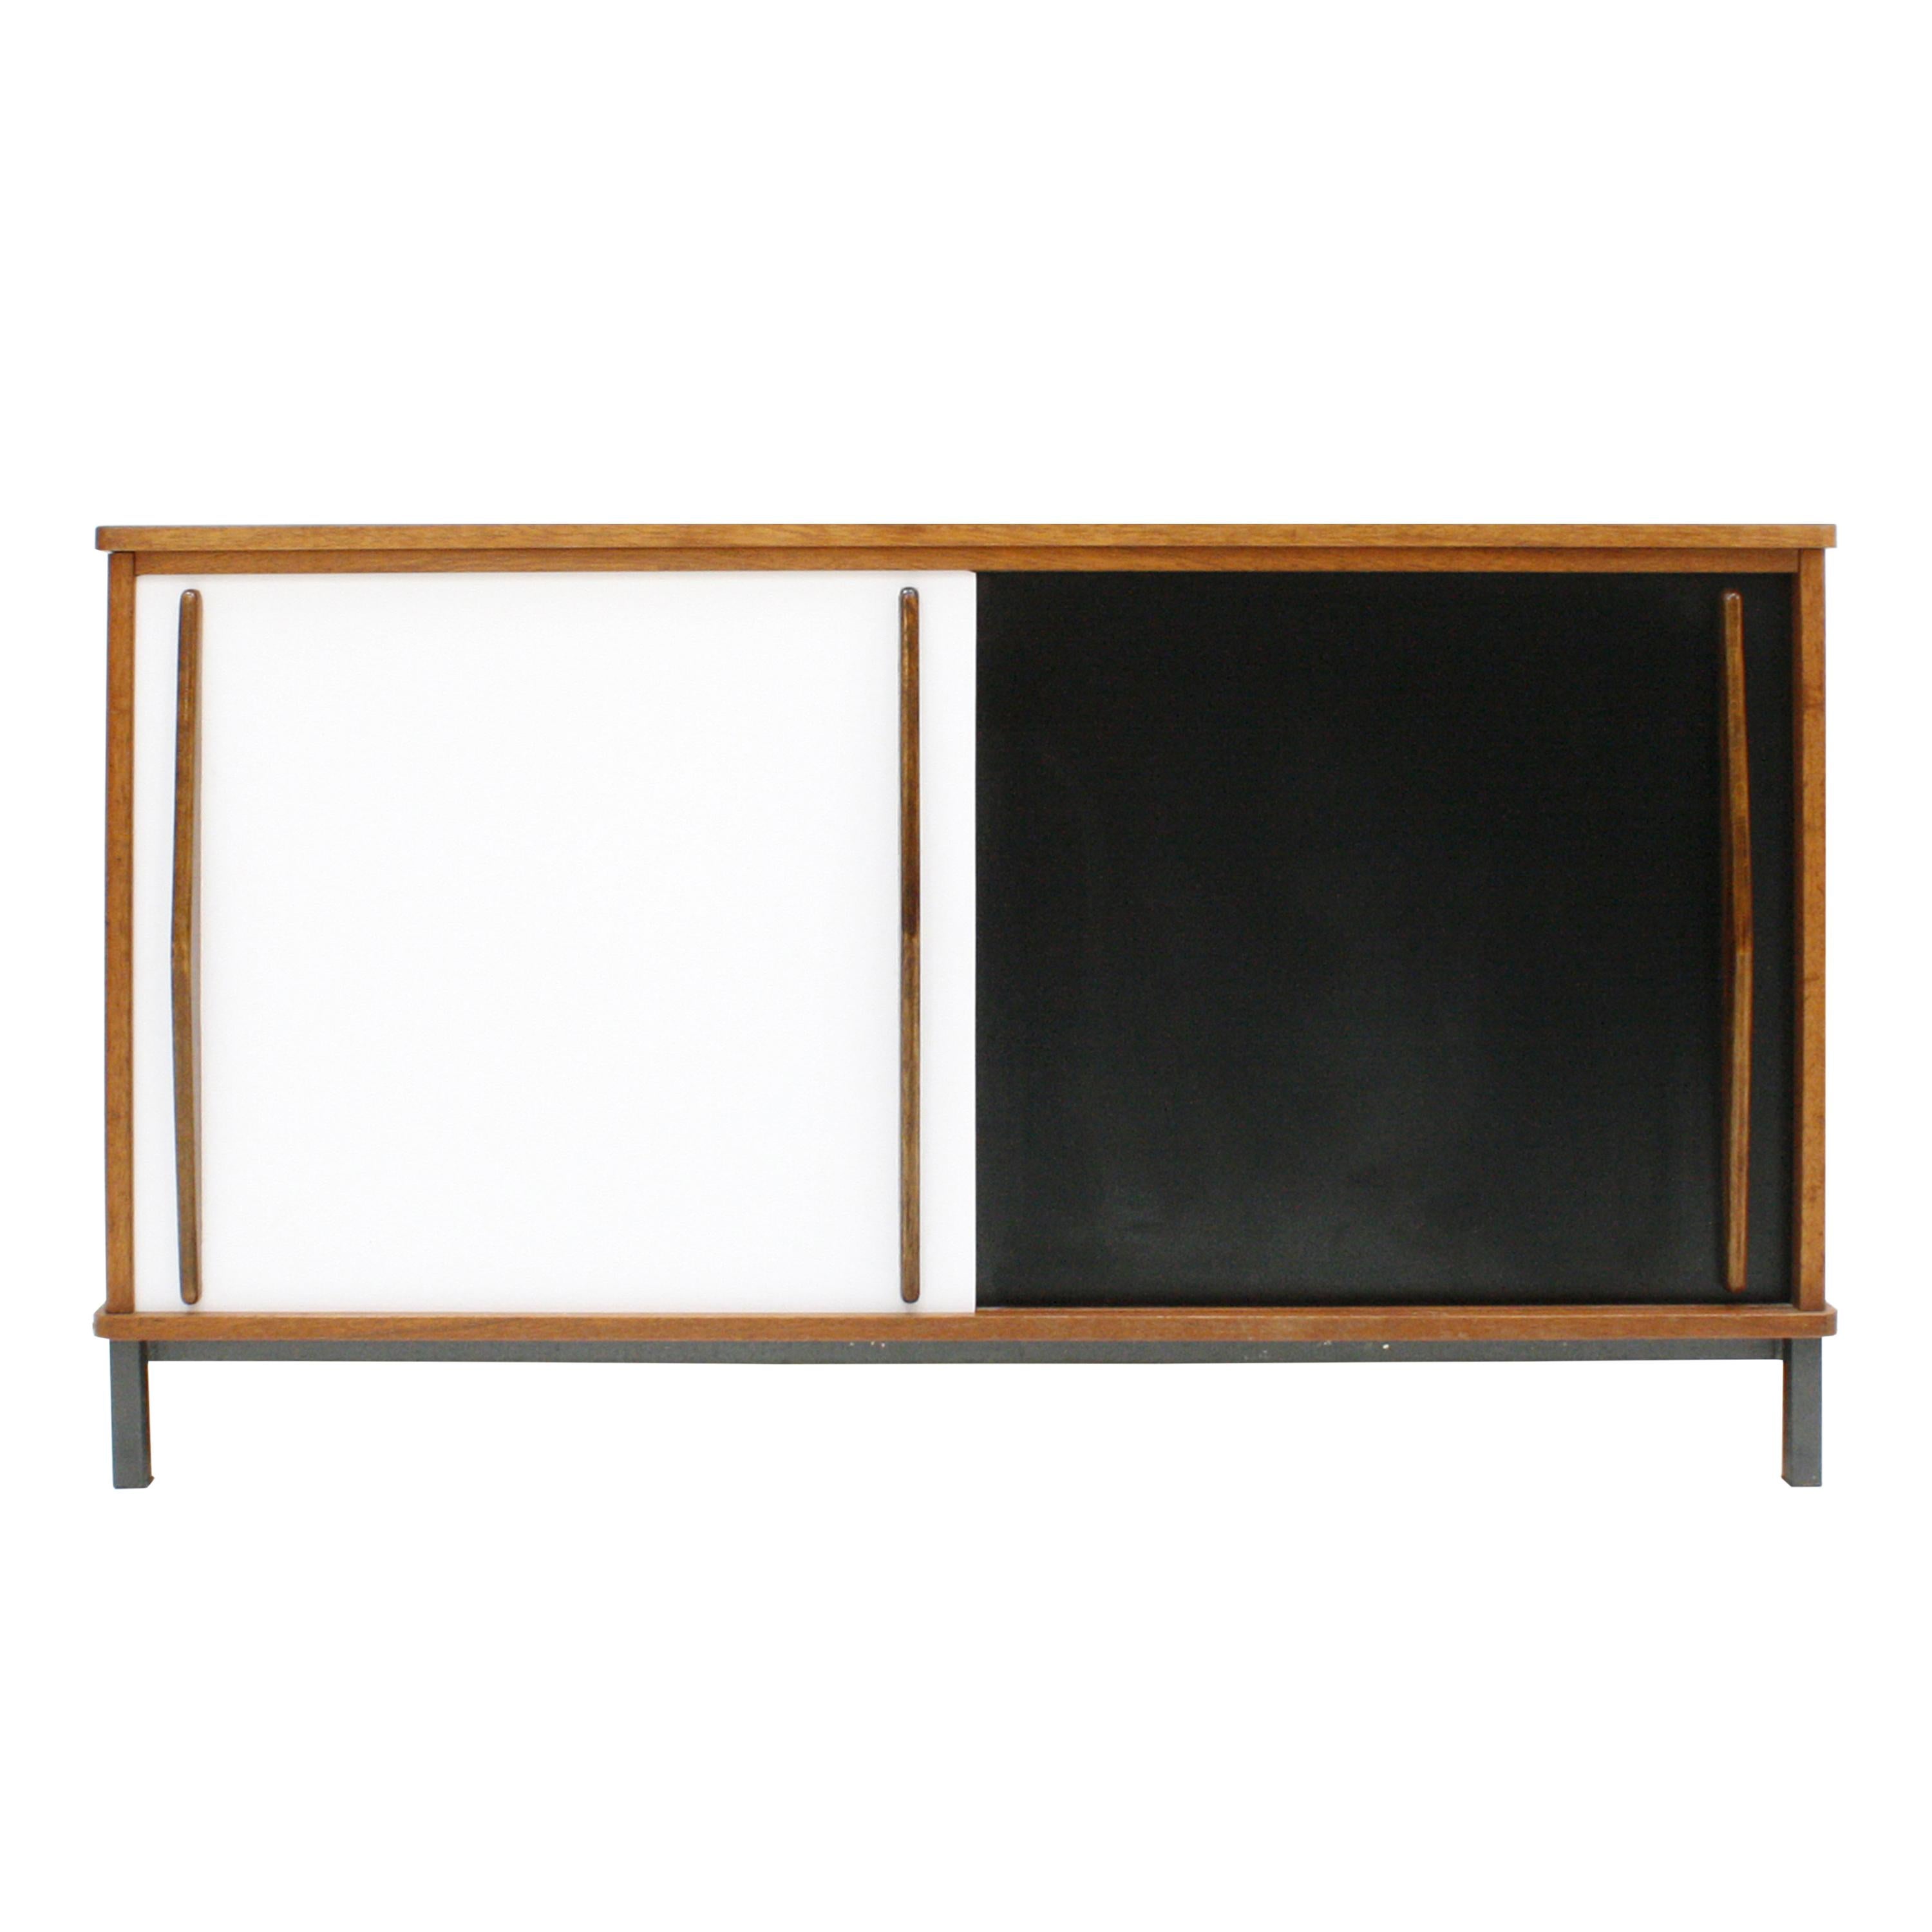 Charlotte Perriand Mid-Century Modern Wood and Metal "Cansado" French Sideboard